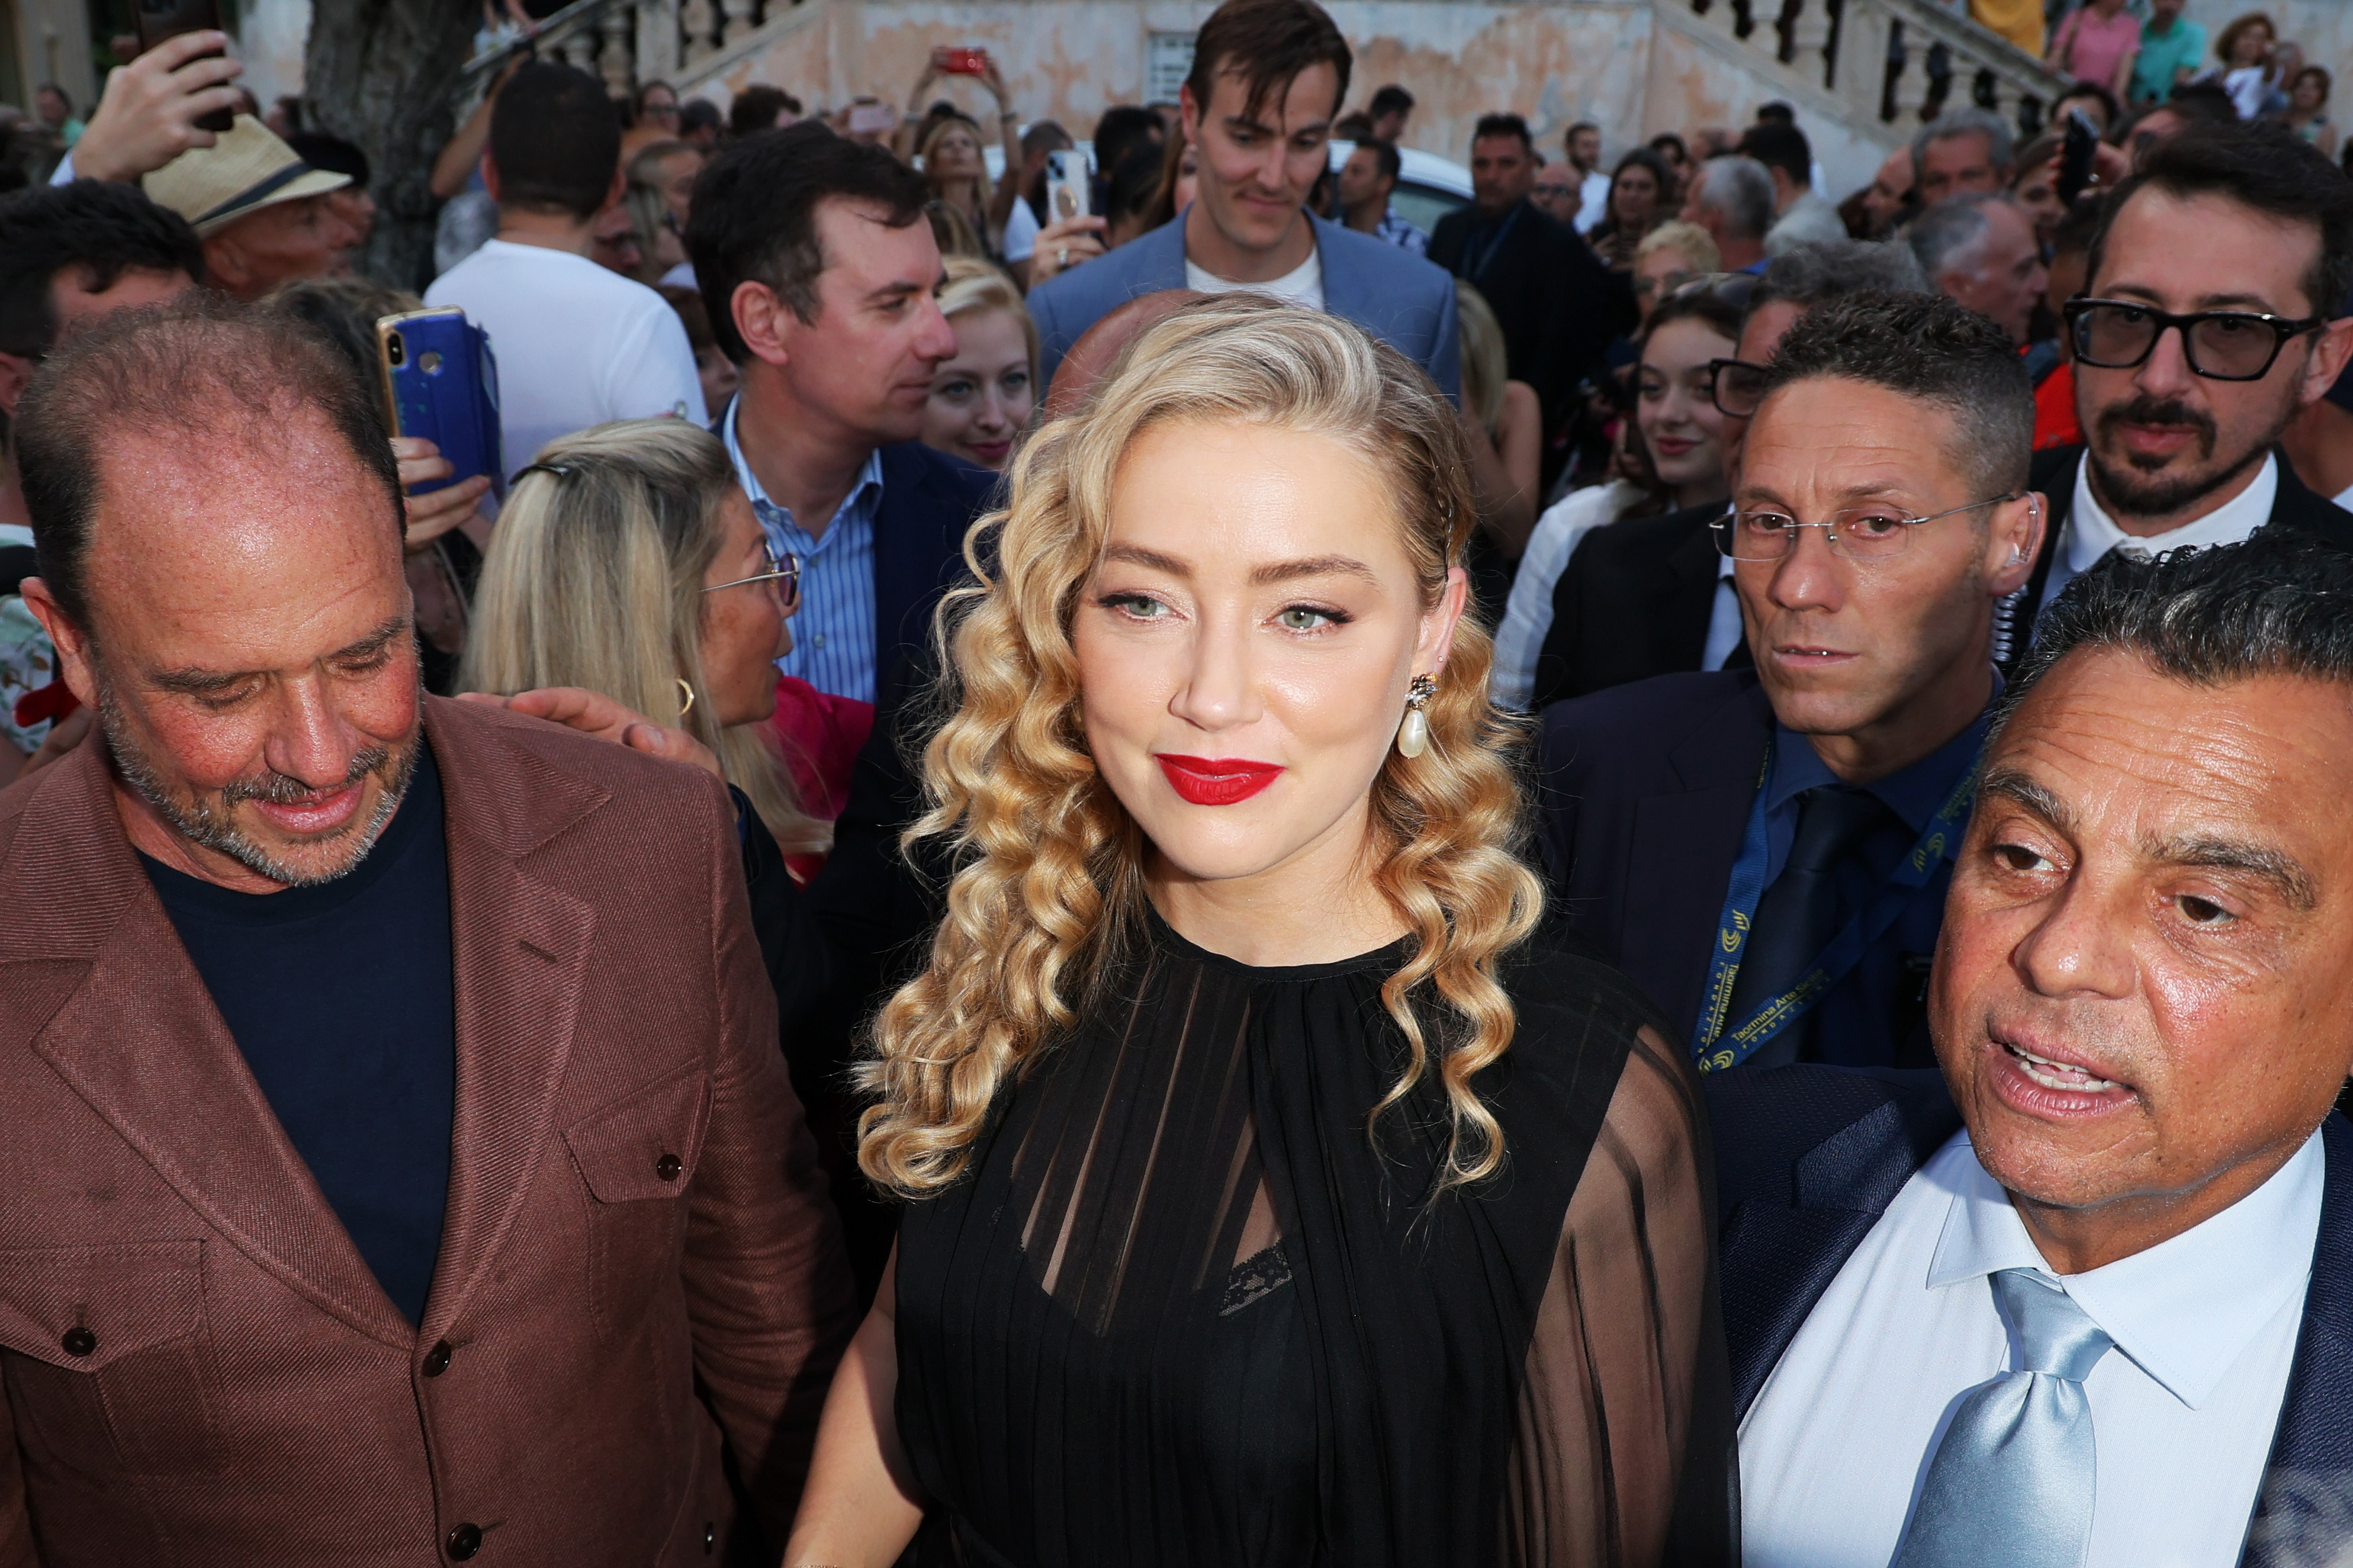 Barrett Wissman and Amber Heard photographed during the premiere of "In the Fire" at the 69th Taormina Film Festival on June 24, 2023 in Taormina, Italy | Source: Getty Images